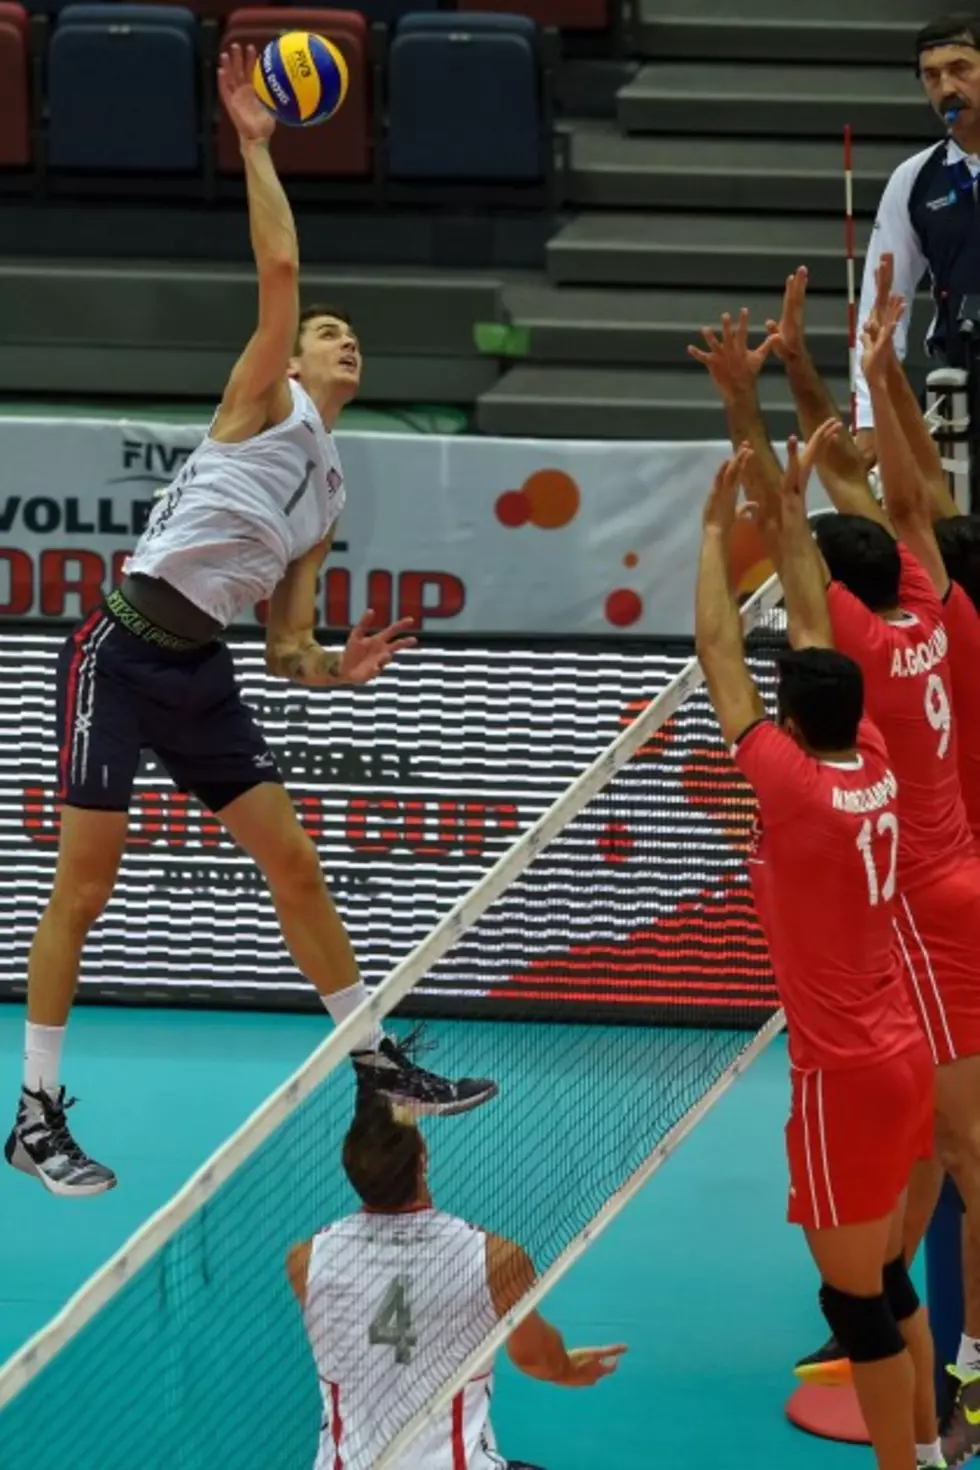 U.S. Stays Unbeaten With 3-set Win Over Tunisia at World Cup